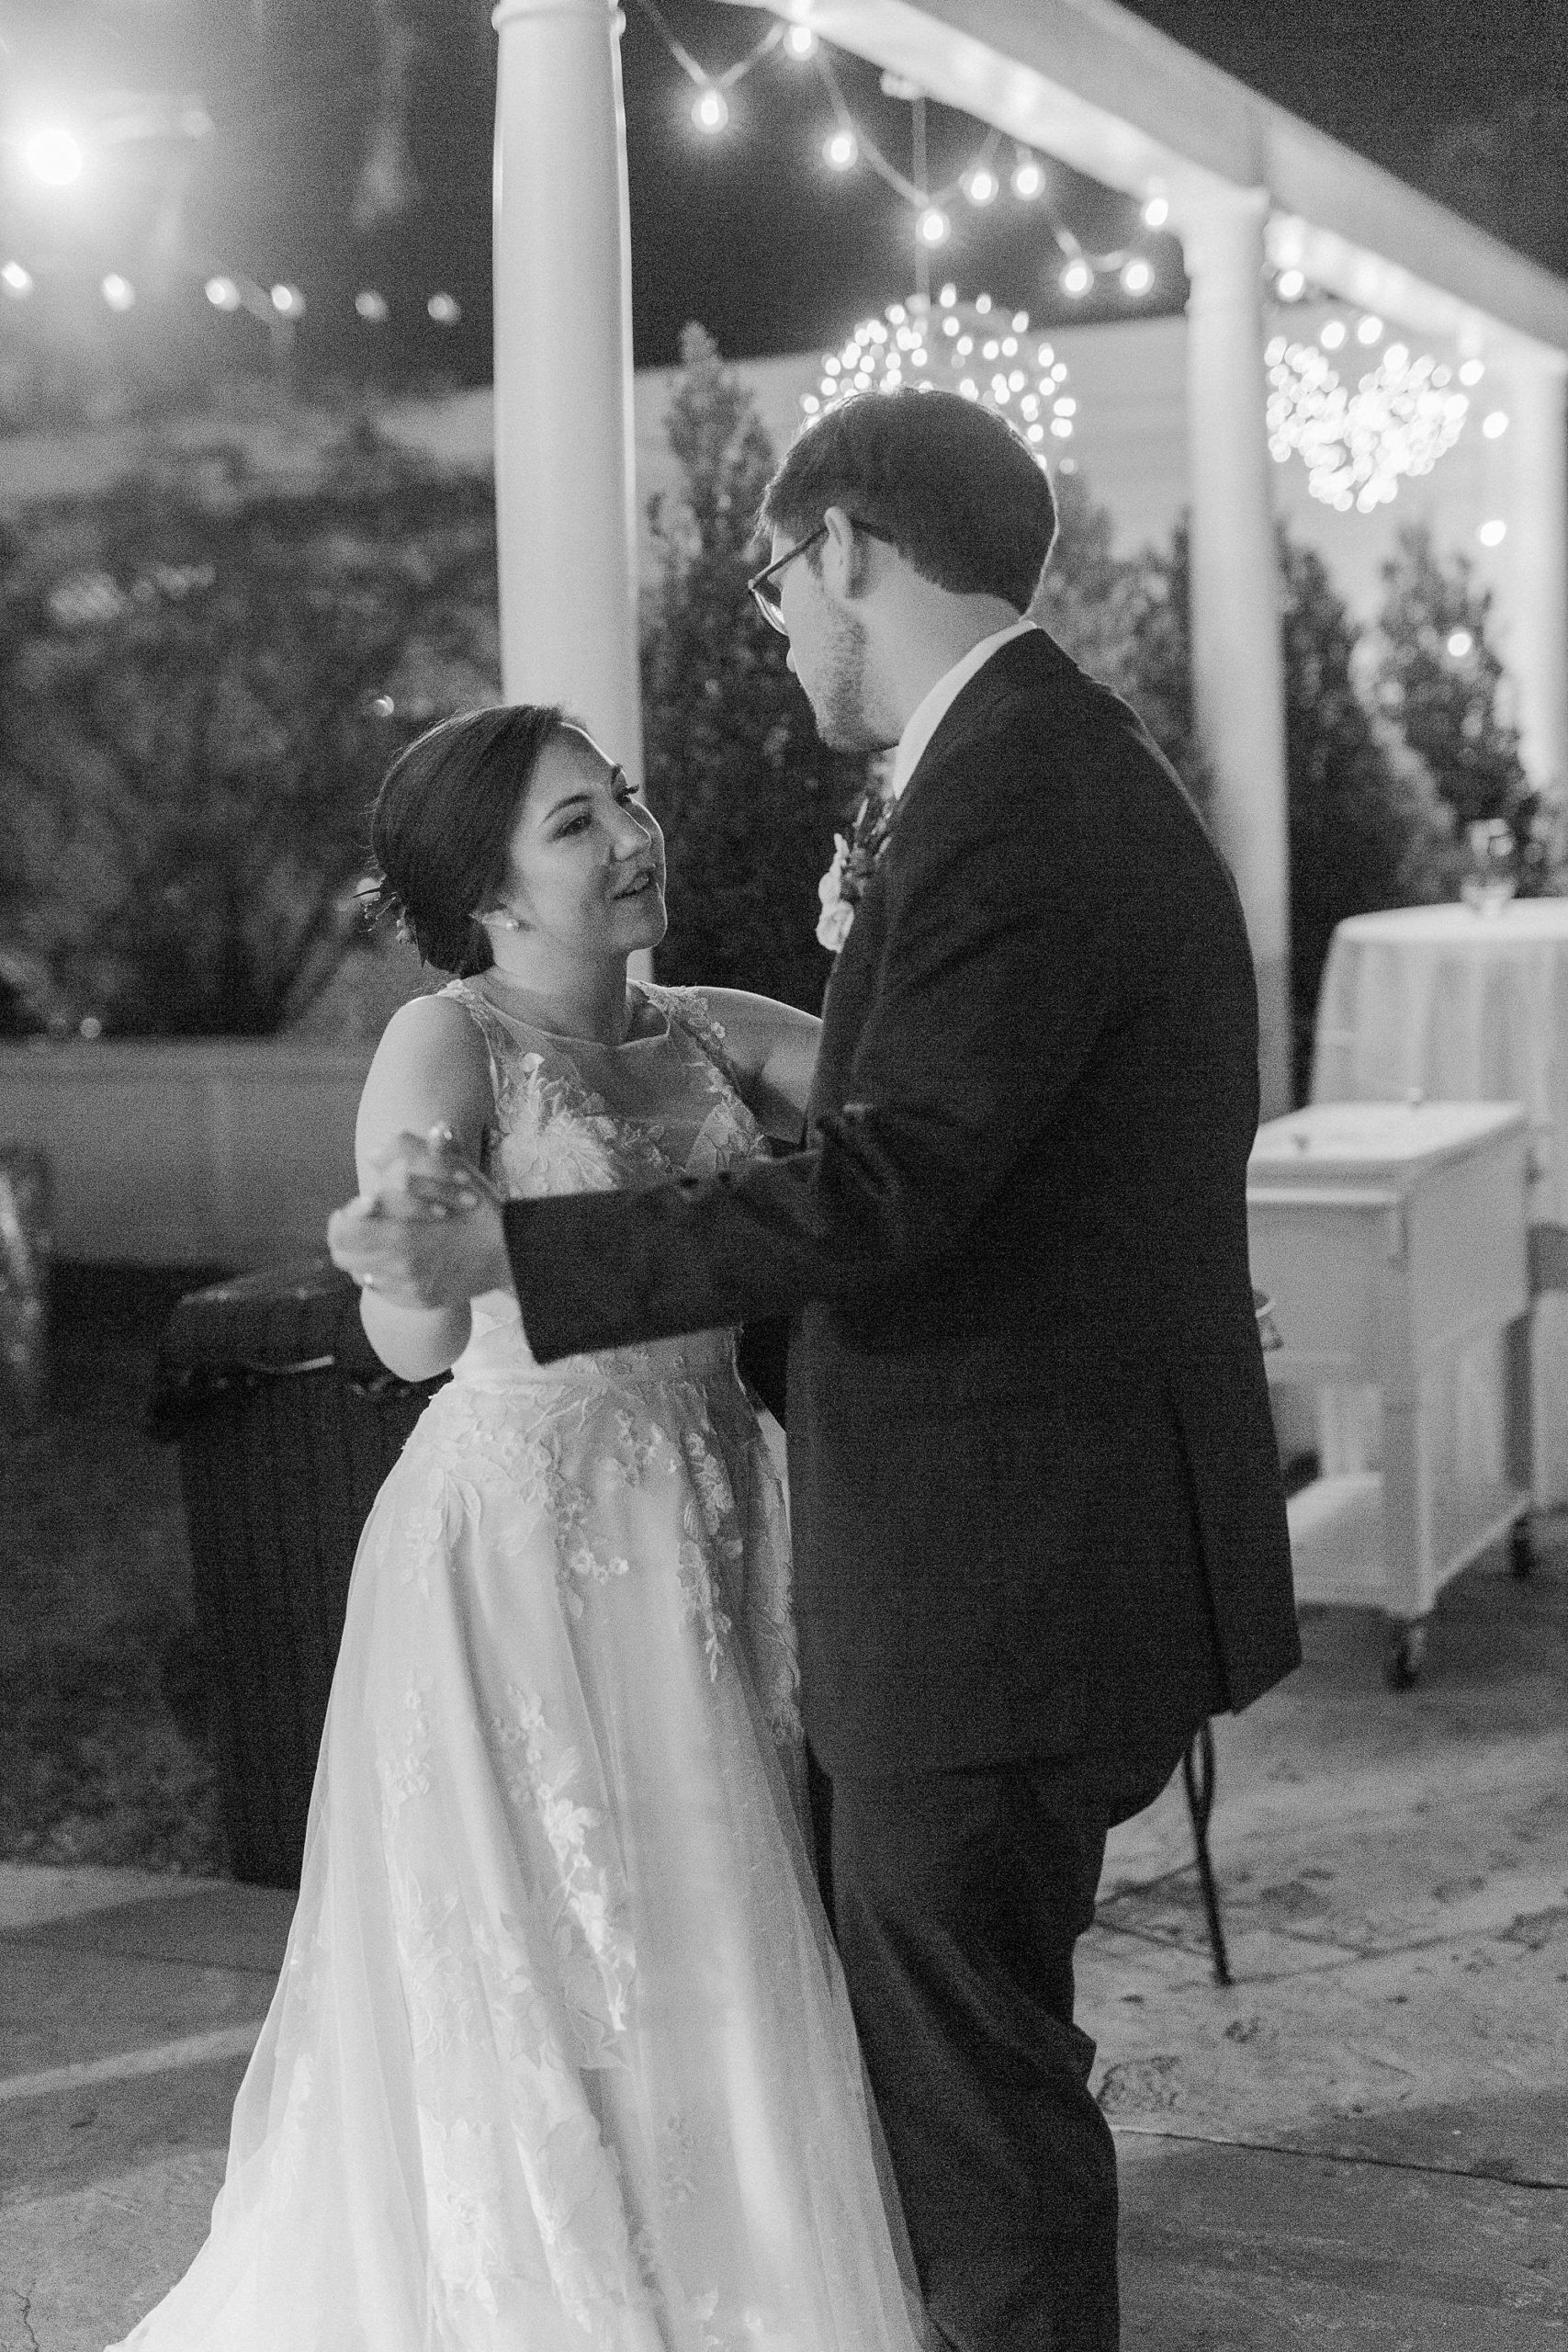 private dance for newlyweds after outdoor reception at Separk Mansion